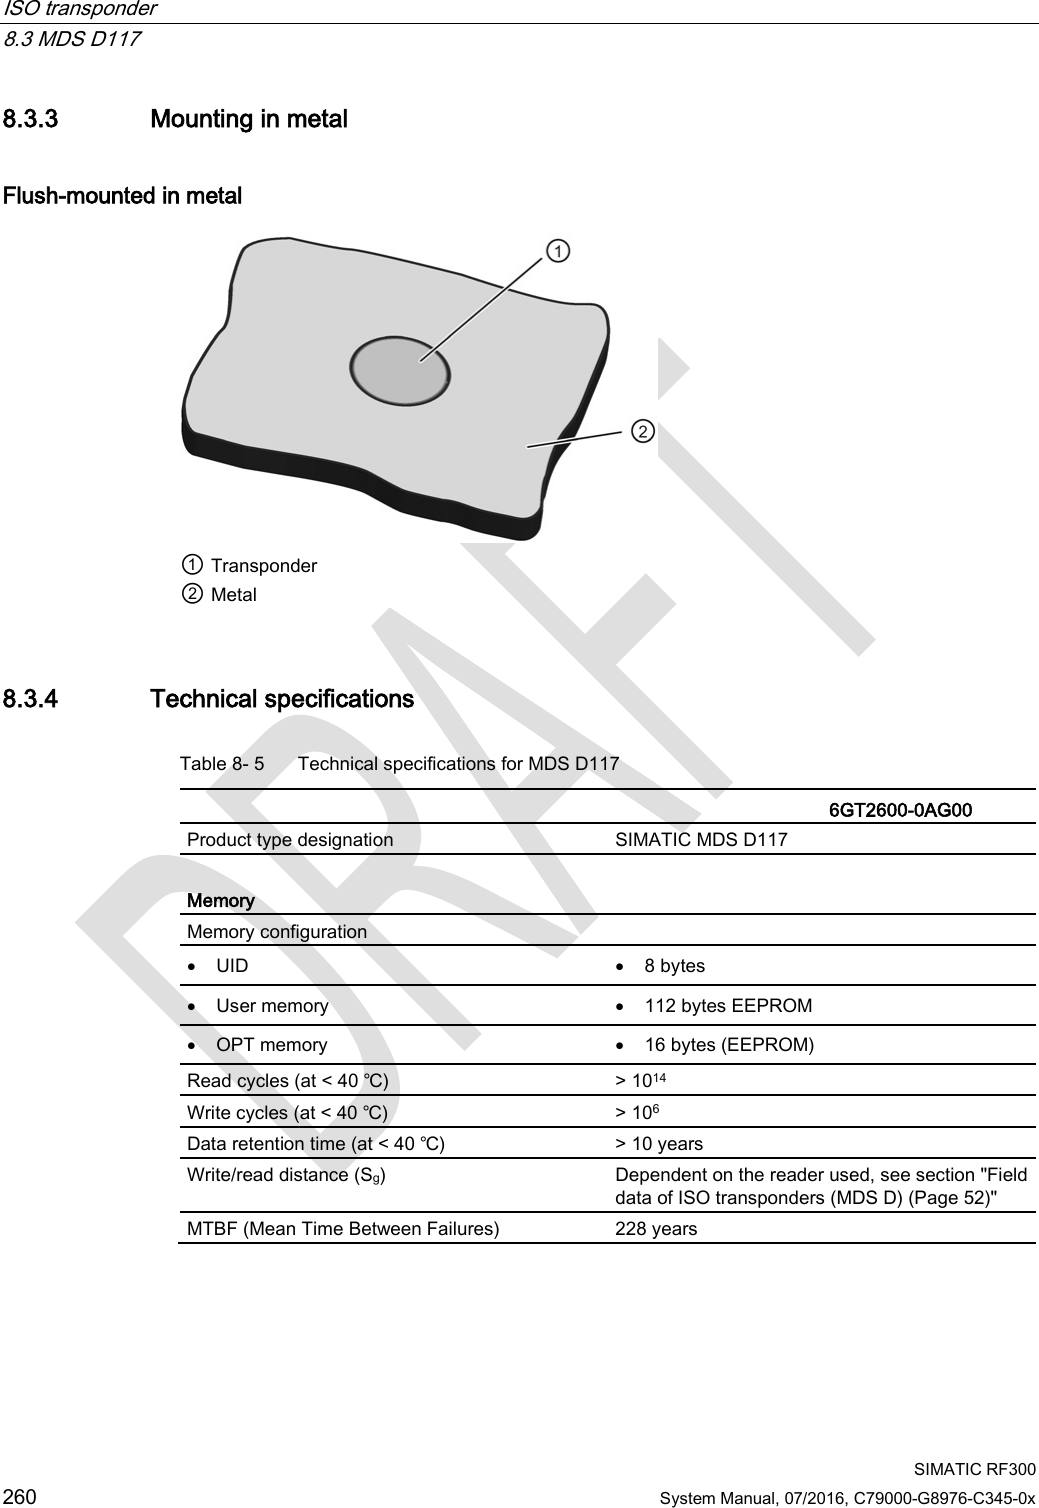 ISO transponder   8.3 MDS D117  SIMATIC RF300 260 System Manual, 07/2016, C79000-G8976-C345-0x 8.3.3 Mounting in metal Flush-mounted in metal  ① Transponder ② Metal 8.3.4 Technical specifications Table 8- 5  Technical specifications for MDS D117    6GT2600-0AG00 Product type designation SIMATIC MDS D117  Memory Memory configuration  • UID • 8 bytes • User memory • 112 bytes EEPROM • OPT memory • 16 bytes (EEPROM) Read cycles (at &lt; 40 ℃) &gt; 1014 Write cycles (at &lt; 40 ℃) &gt; 106 Data retention time (at &lt; 40 ℃) &gt; 10 years Write/read distance (Sg)  Dependent on the reader used, see section &quot;Field data of ISO transponders (MDS D) (Page 52)&quot; MTBF (Mean Time Between Failures) 228 years 